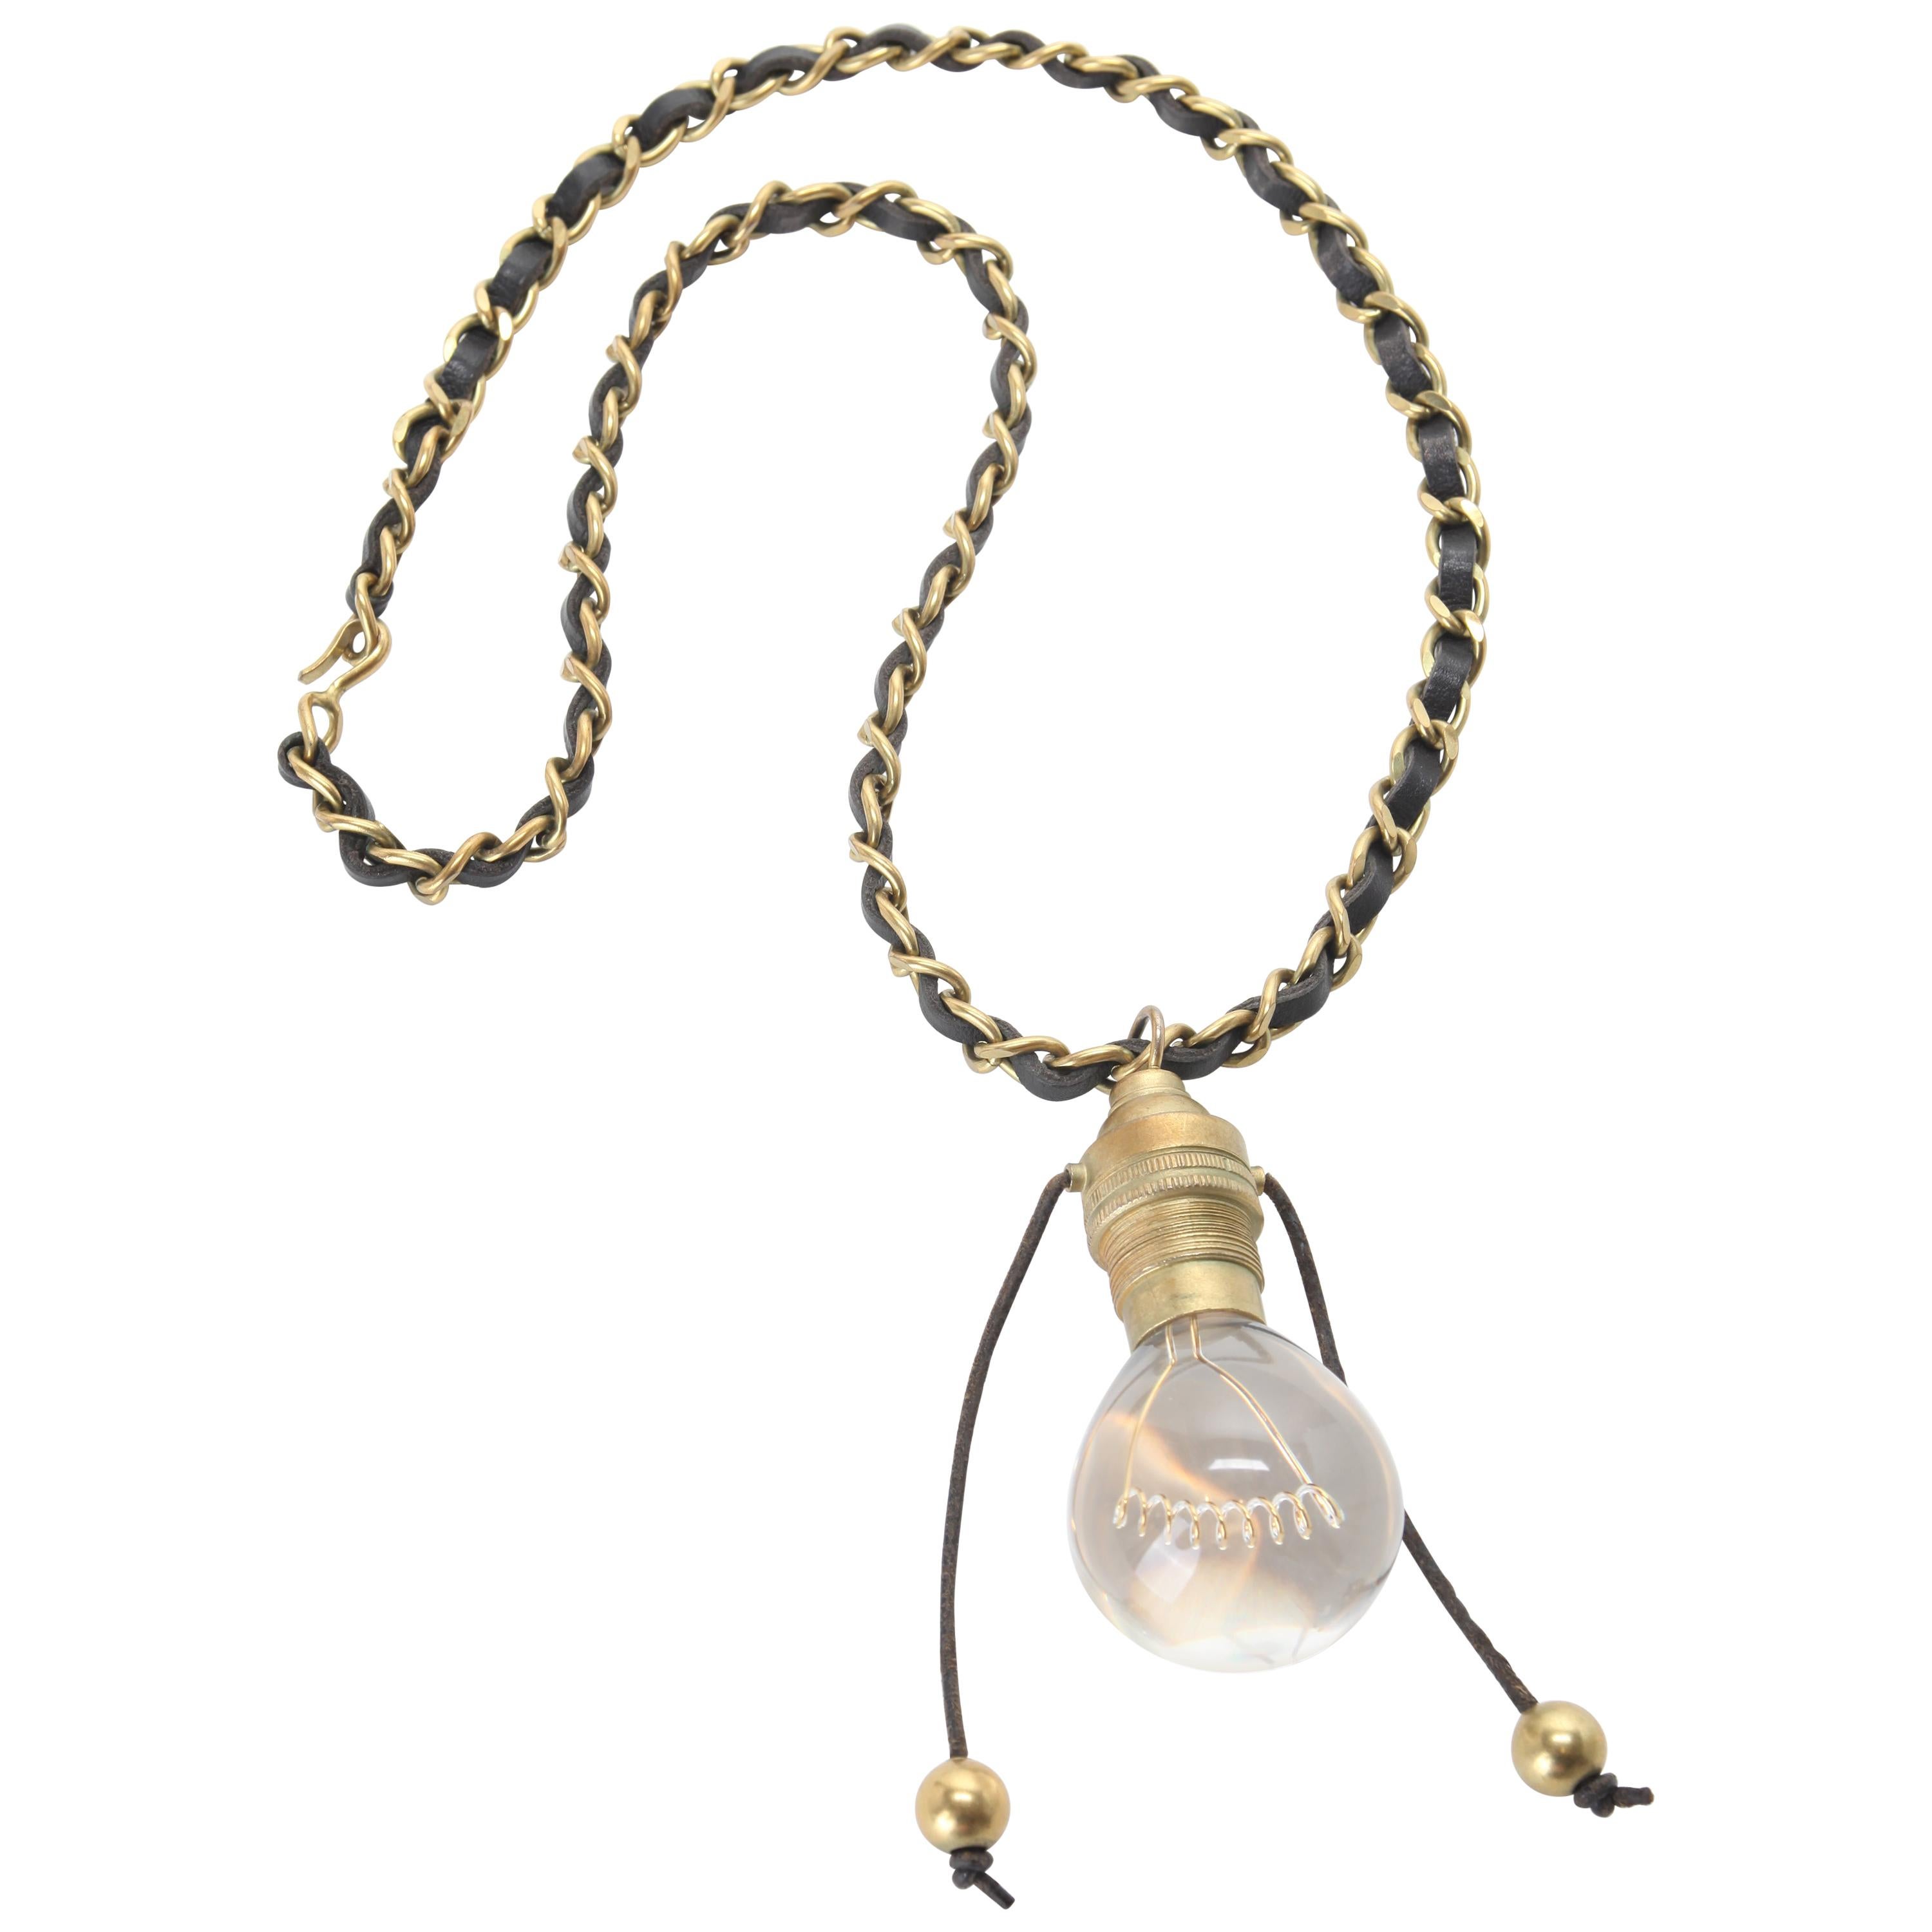 CHANEL Runway Leather Gold Light Bulb Chain Necklace 1994